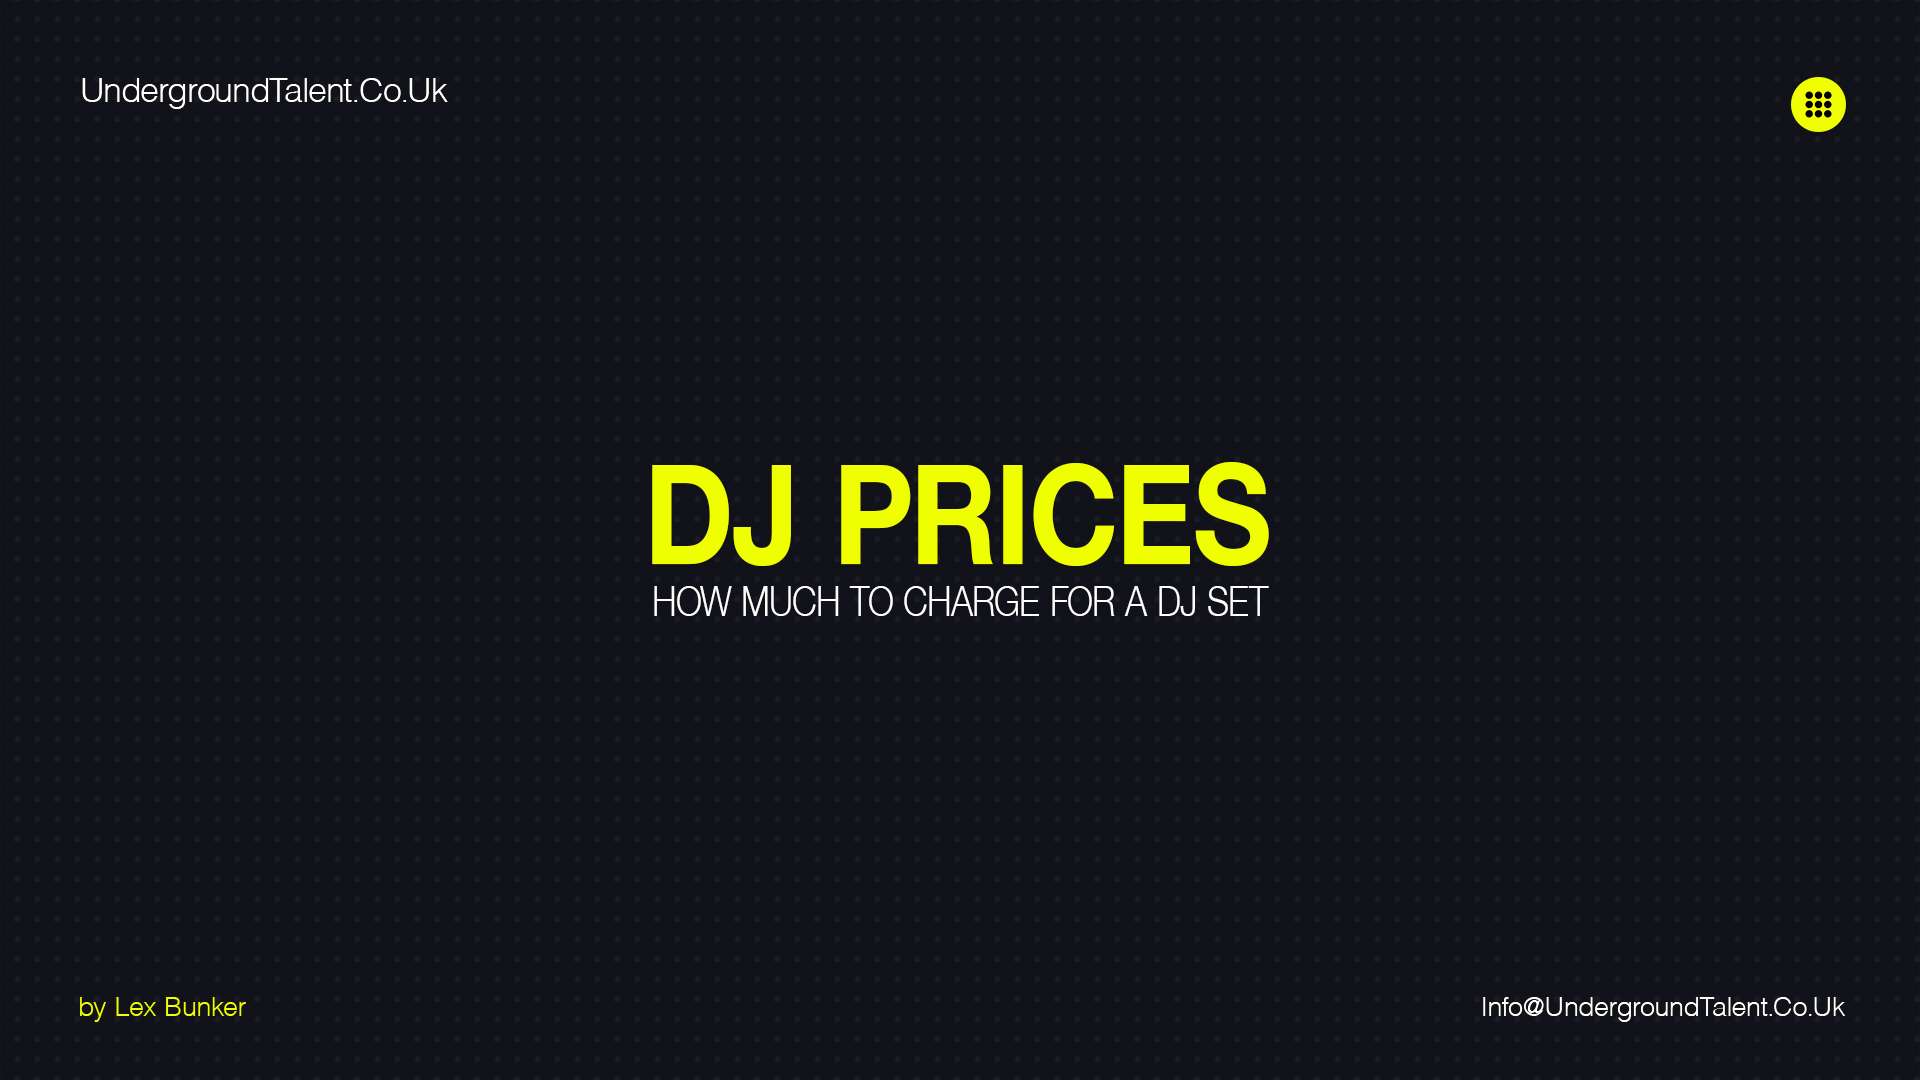 DJ Prices: How Much to Charge for a DJ Set